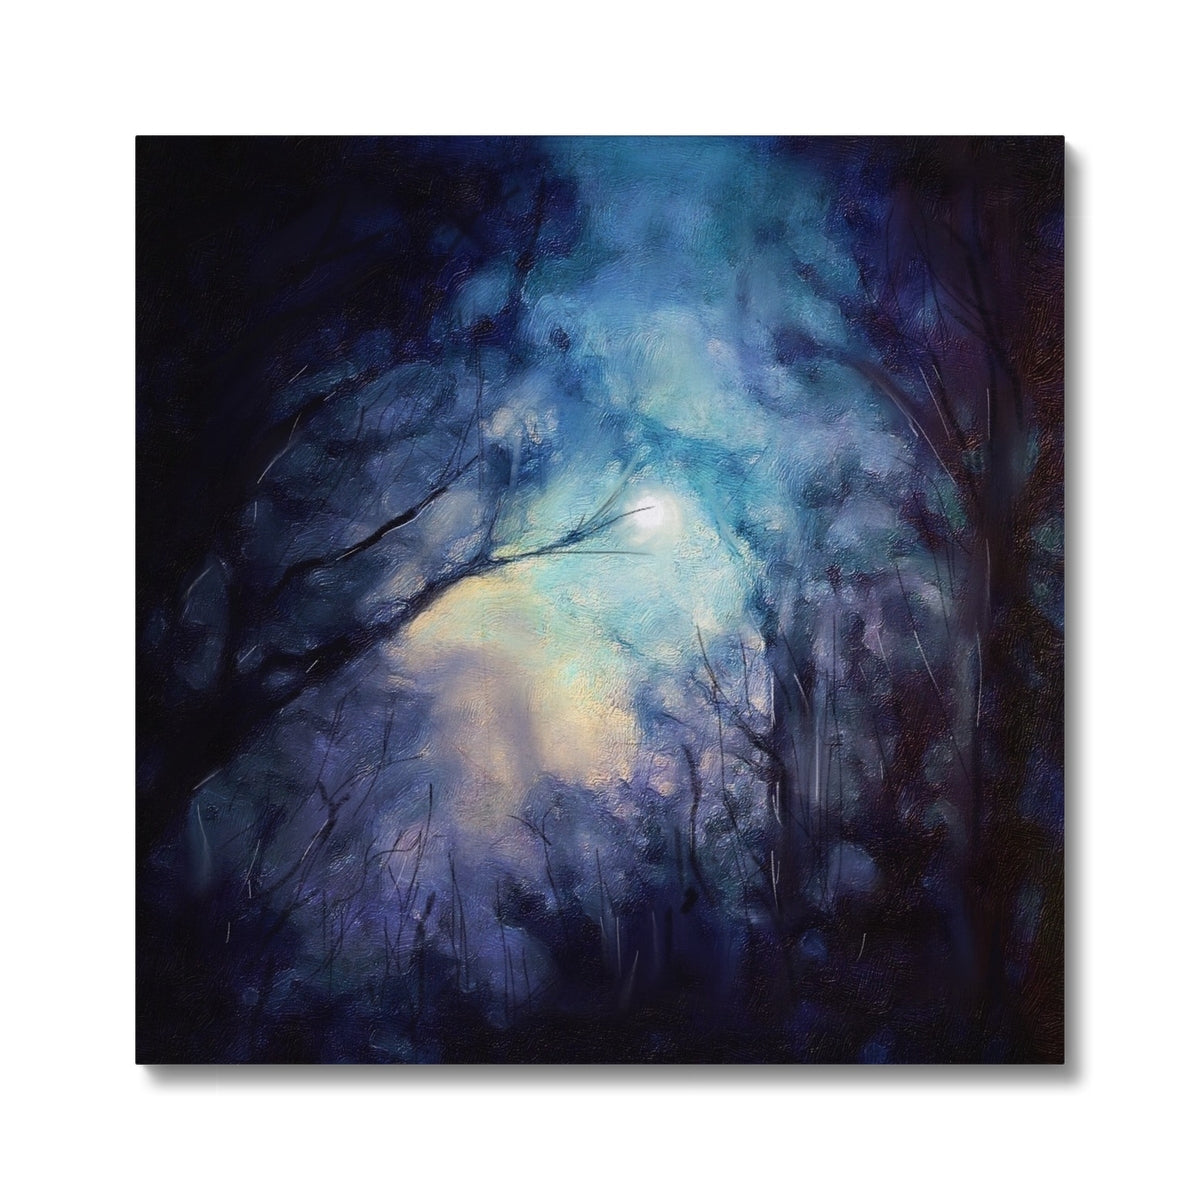 A Moonlit Highland Wood Painting | Canvas From Scotland-Contemporary Stretched Canvas Prints-Scottish Highlands & Lowlands Art Gallery-24"x24"-Paintings, Prints, Homeware, Art Gifts From Scotland By Scottish Artist Kevin Hunter